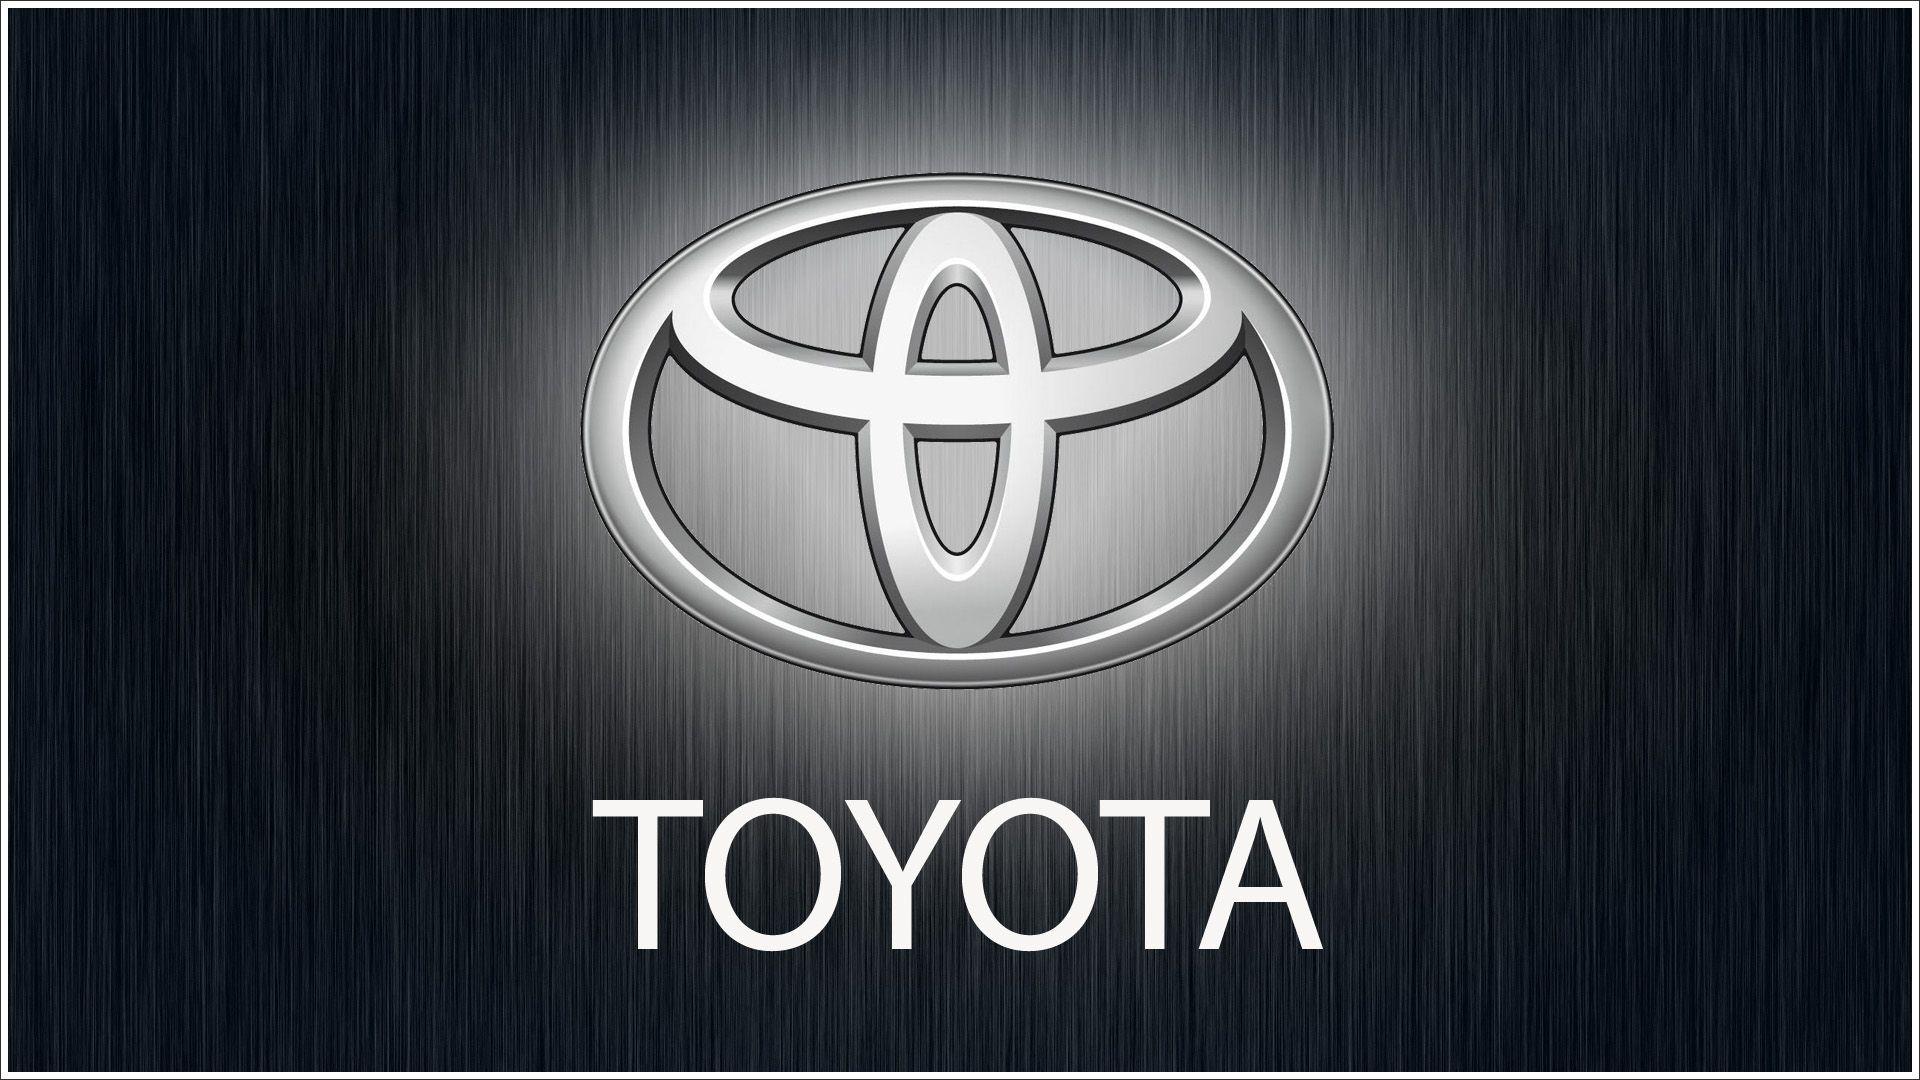 Toyota Old Kanji Logo - Toyota Logo Meaning and History, latest models | World Cars Brands